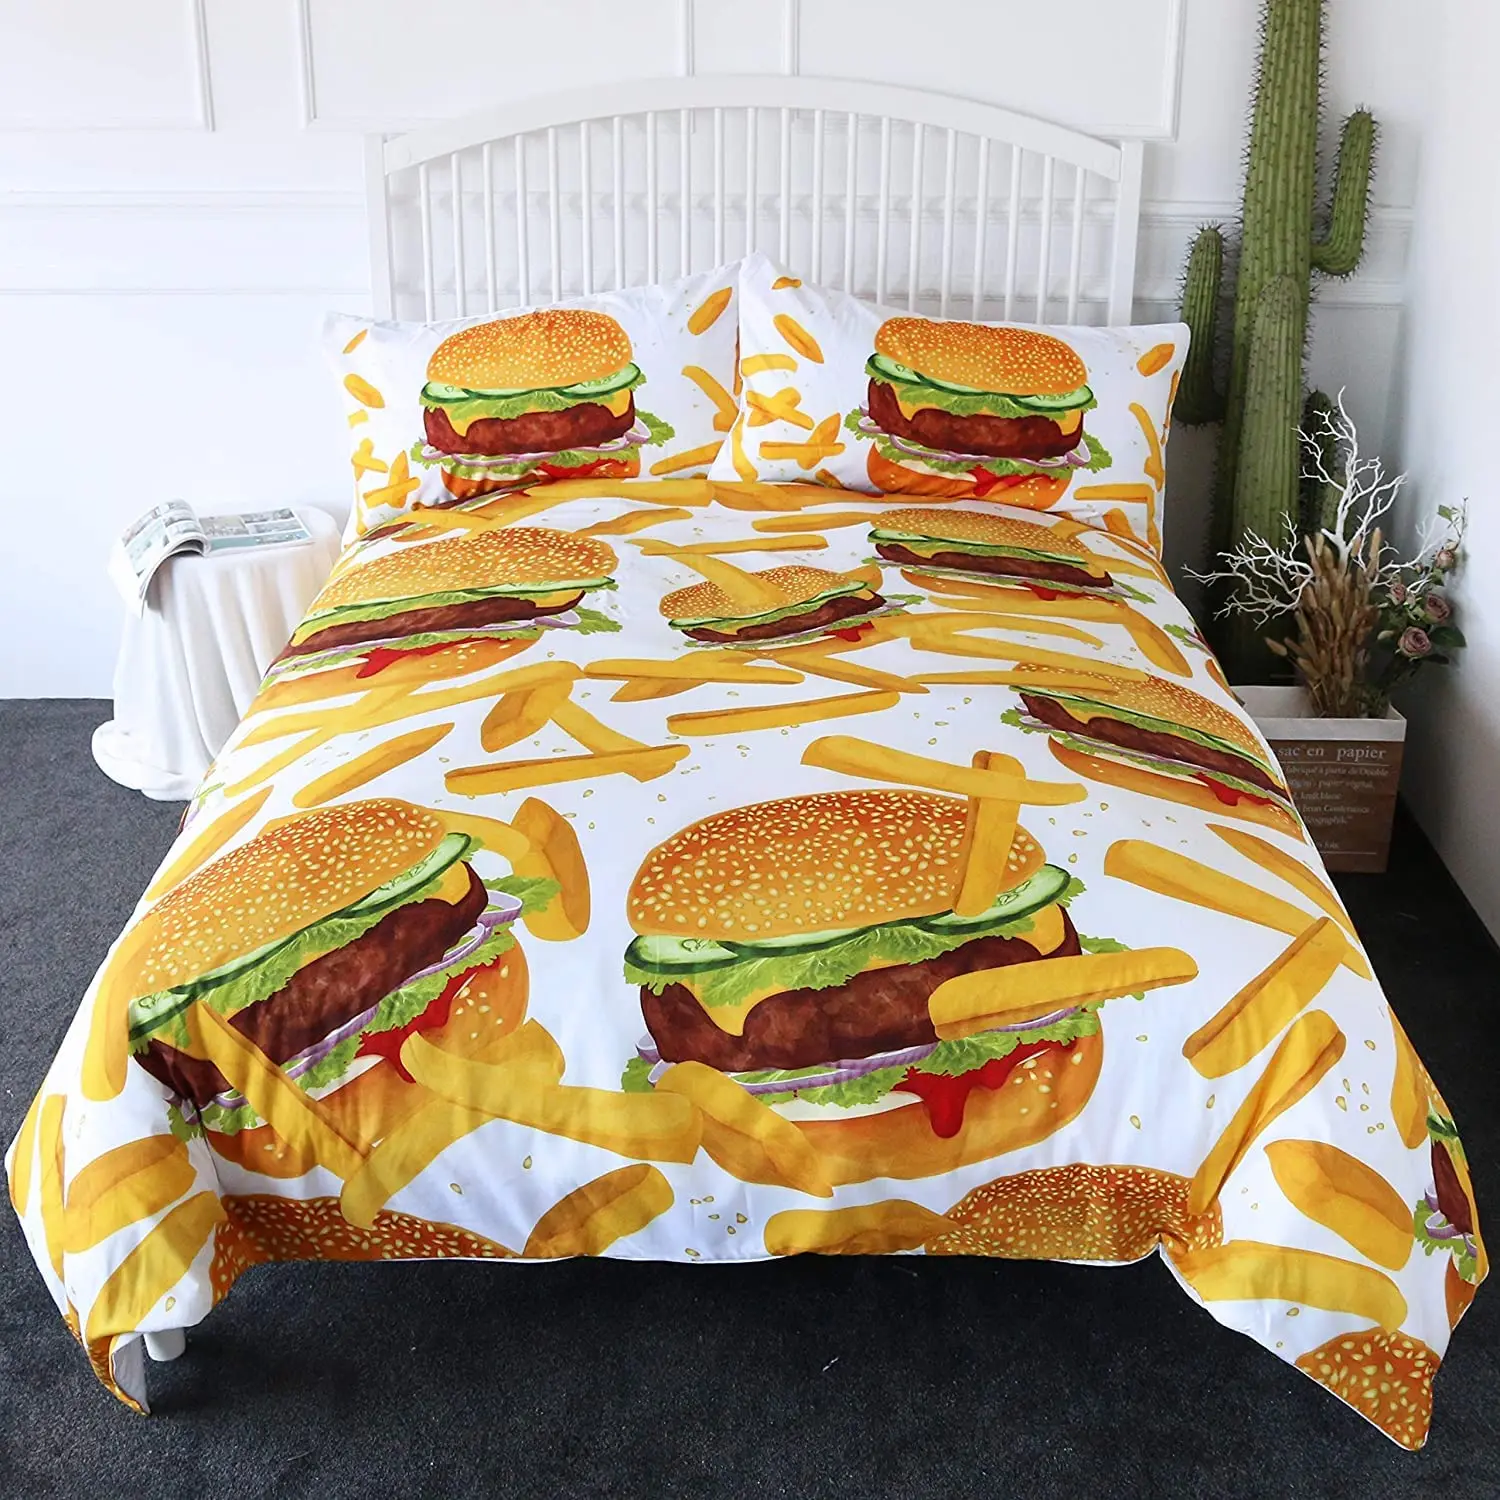 Hamburger Fries Candy Bedding 3D Giant Burger Duvet Cover Set 3 Pieces Fun Fast Food Bedspread King Size Polyester Bedding Set